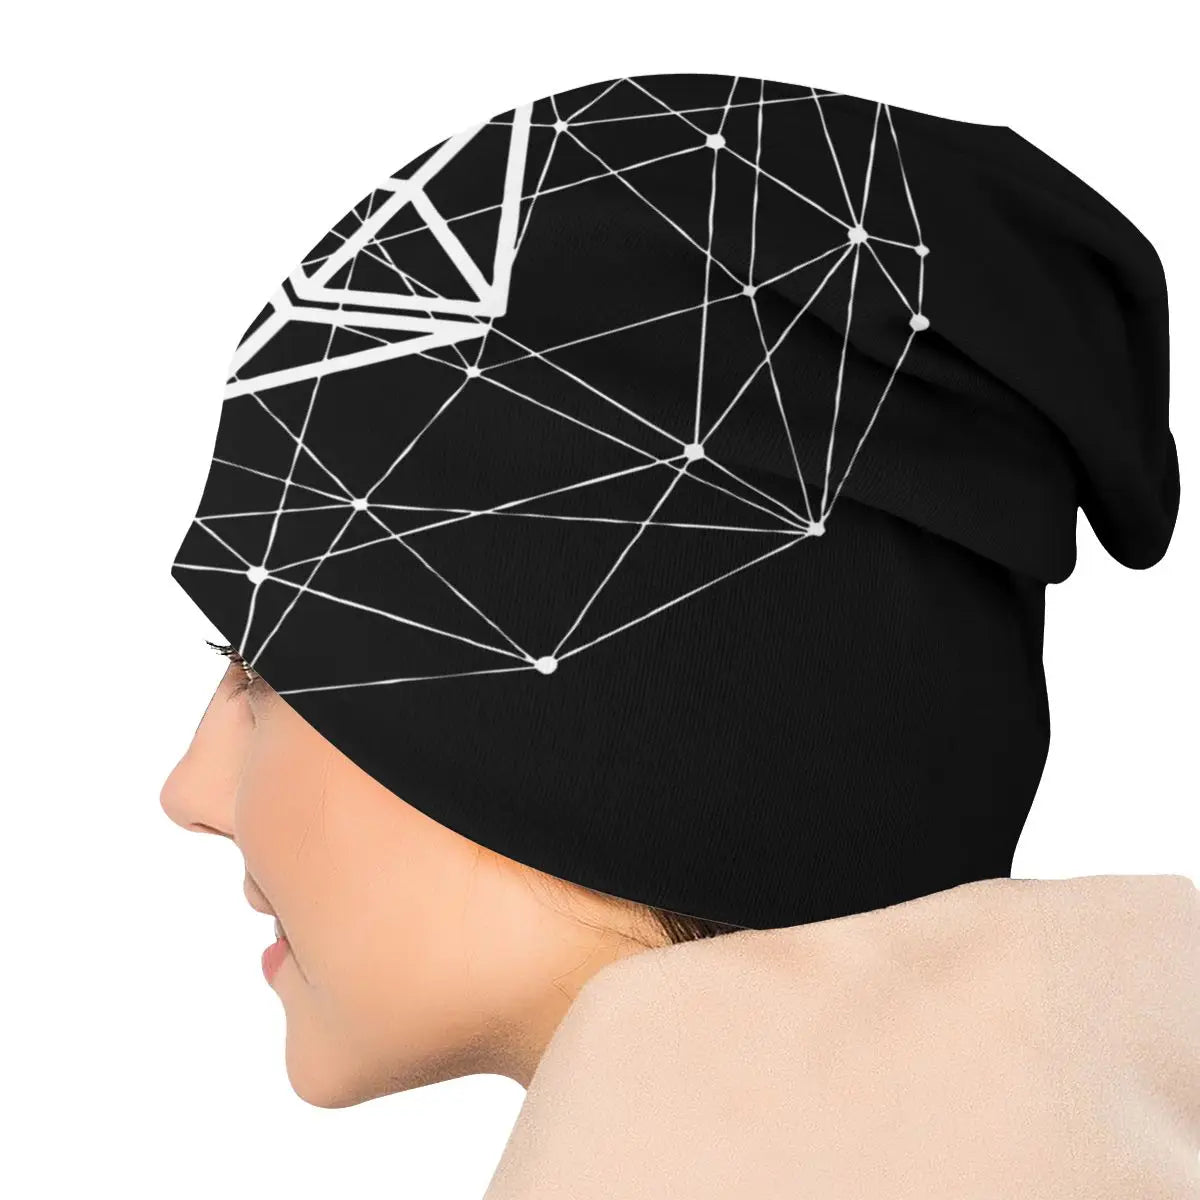 Ethereum Beanie For ETH Maxis & Hodlers